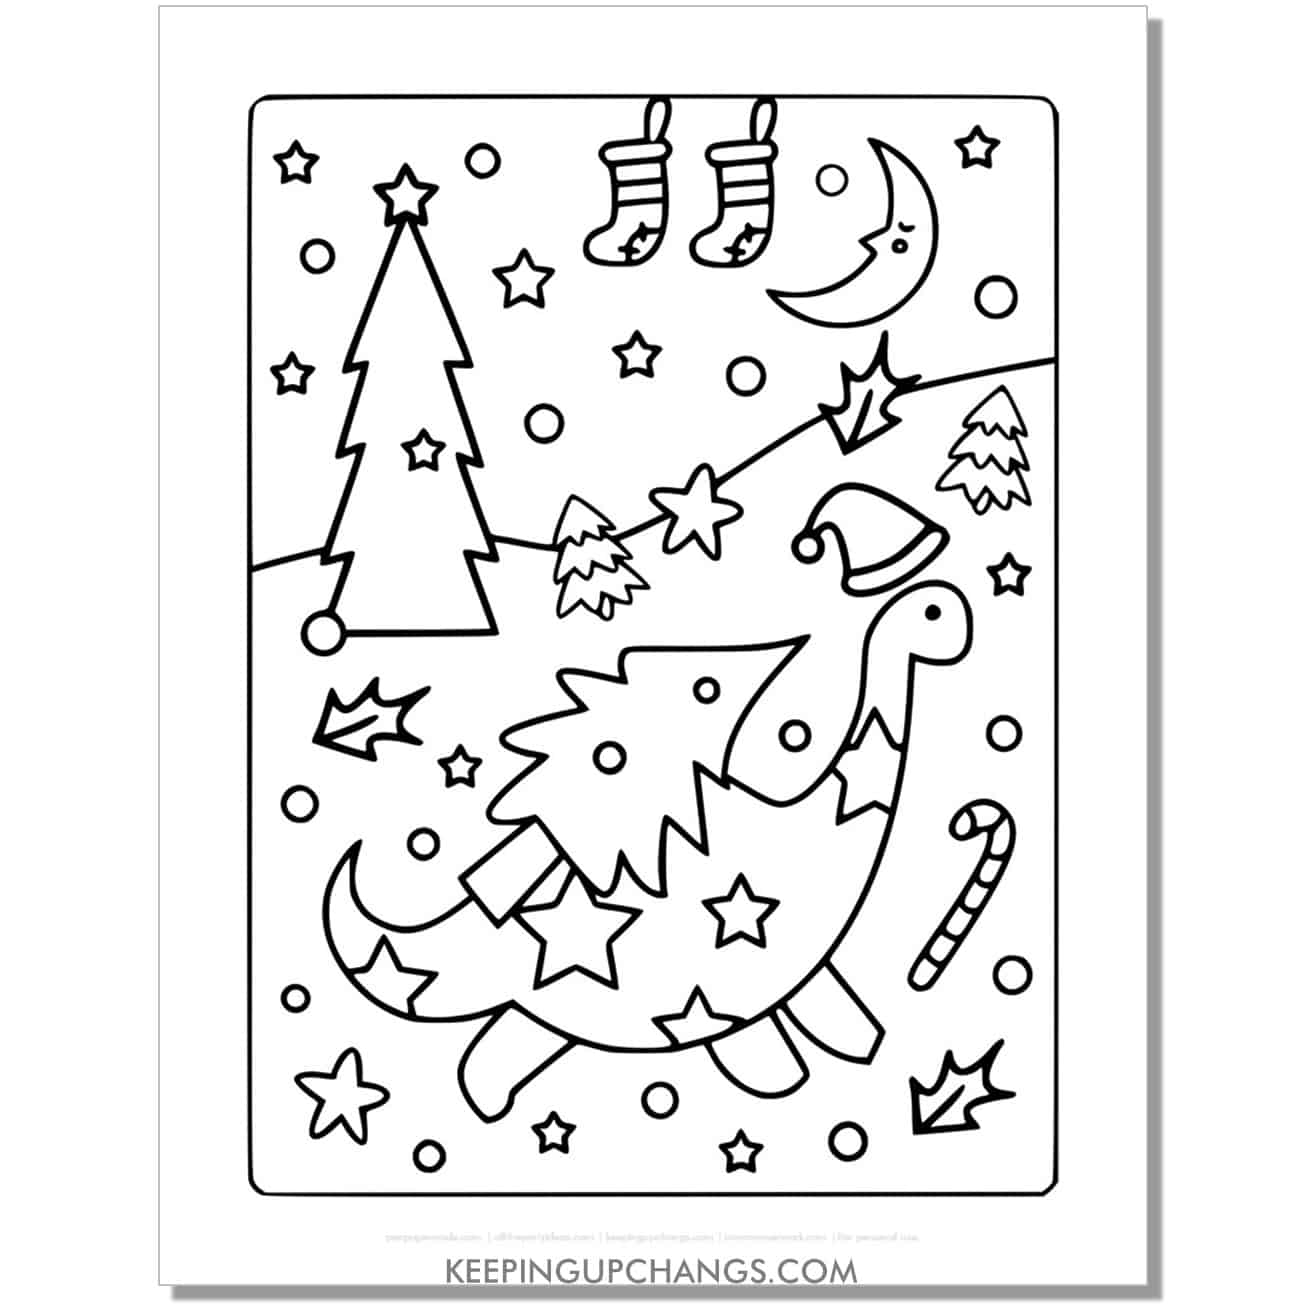 free full size large christmas dinosaur with trees, stockings, candy cane coloring page.